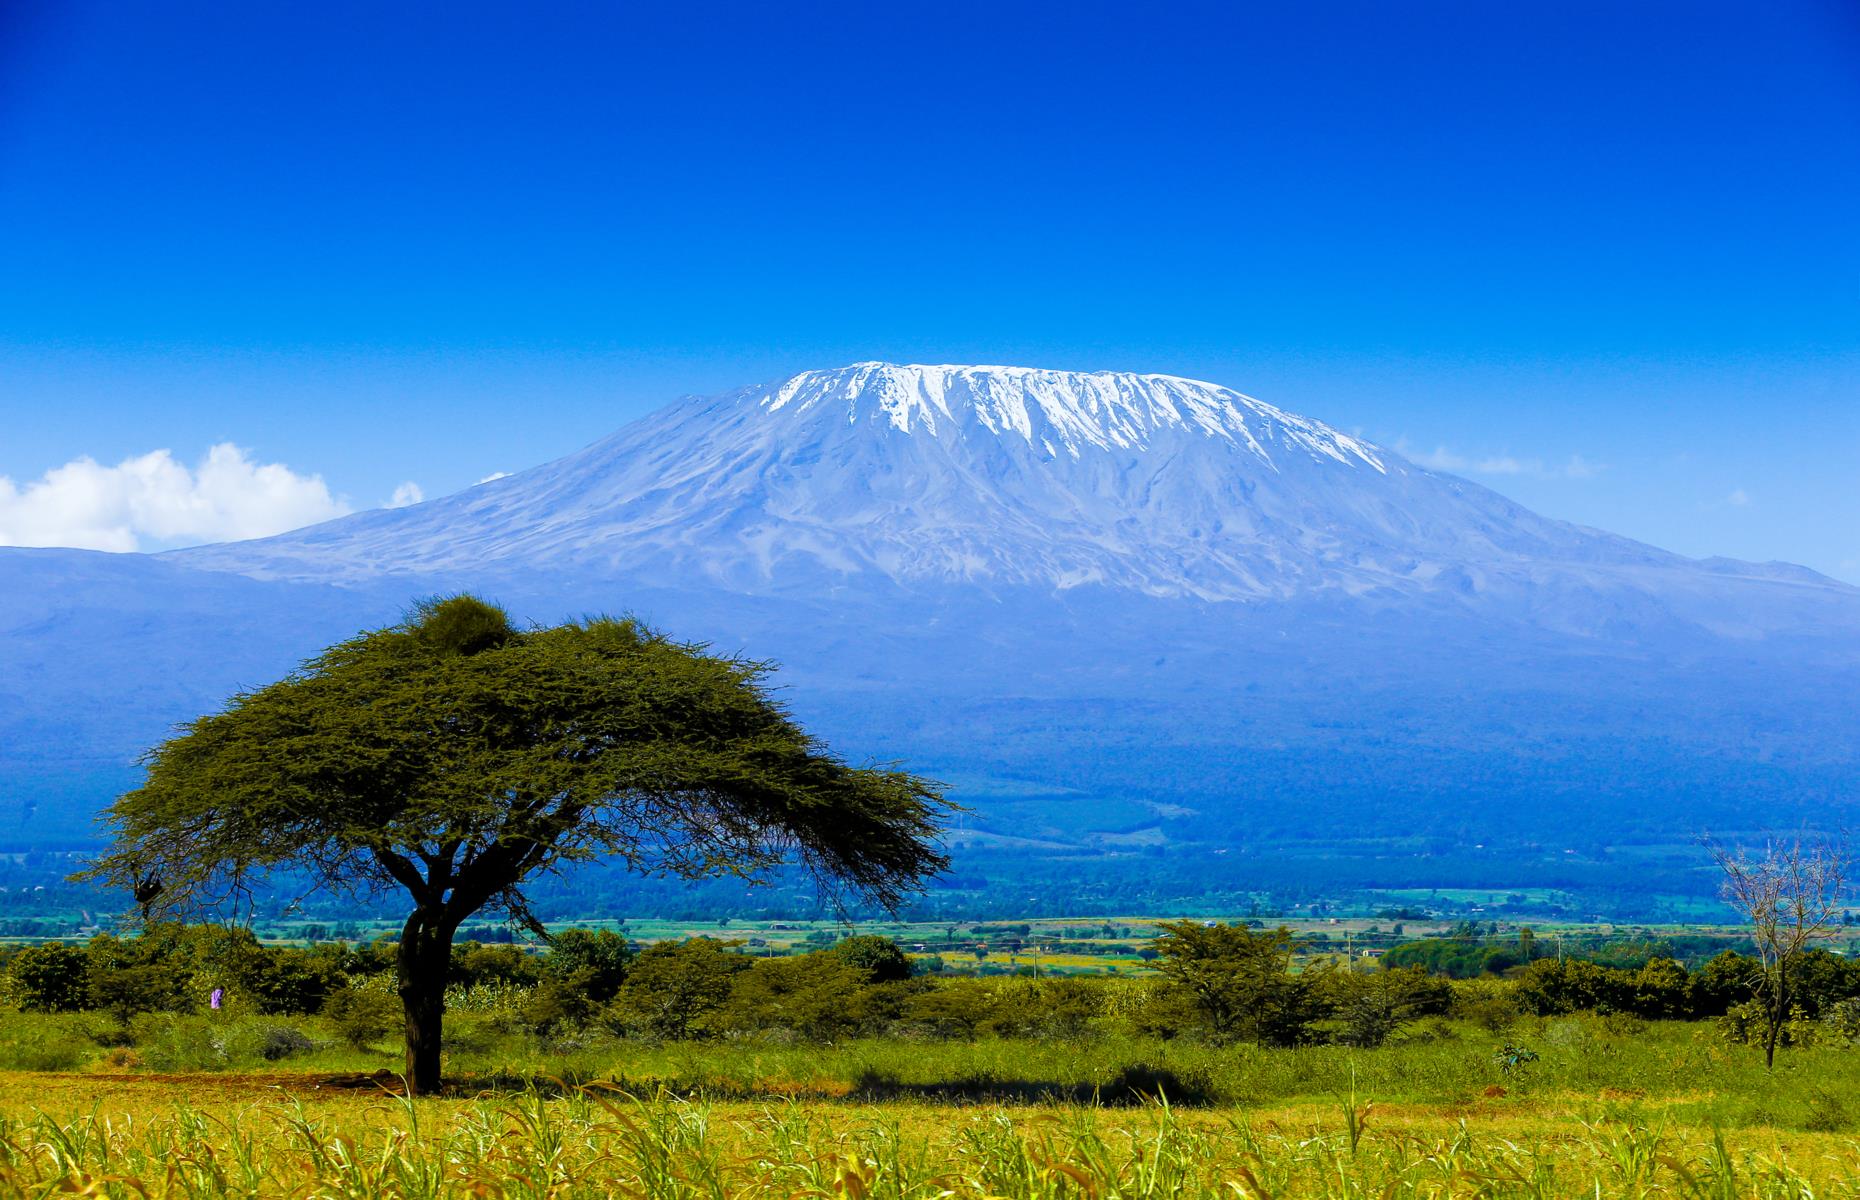 <p>Kilimanjaro might well be the most famous on our list – though it’s not usually known as a volcano. It is, in fact, a stratovolcano, meaning a huge volcano that’s built up of ash, lava and rock. Africa’s tallest mountain and, looming at 19,340 feet (5,895m), the largest in the world that isn’t part of a range, Kilimanjaro is made up of three cones including Kibo, which forms the summit.</p>